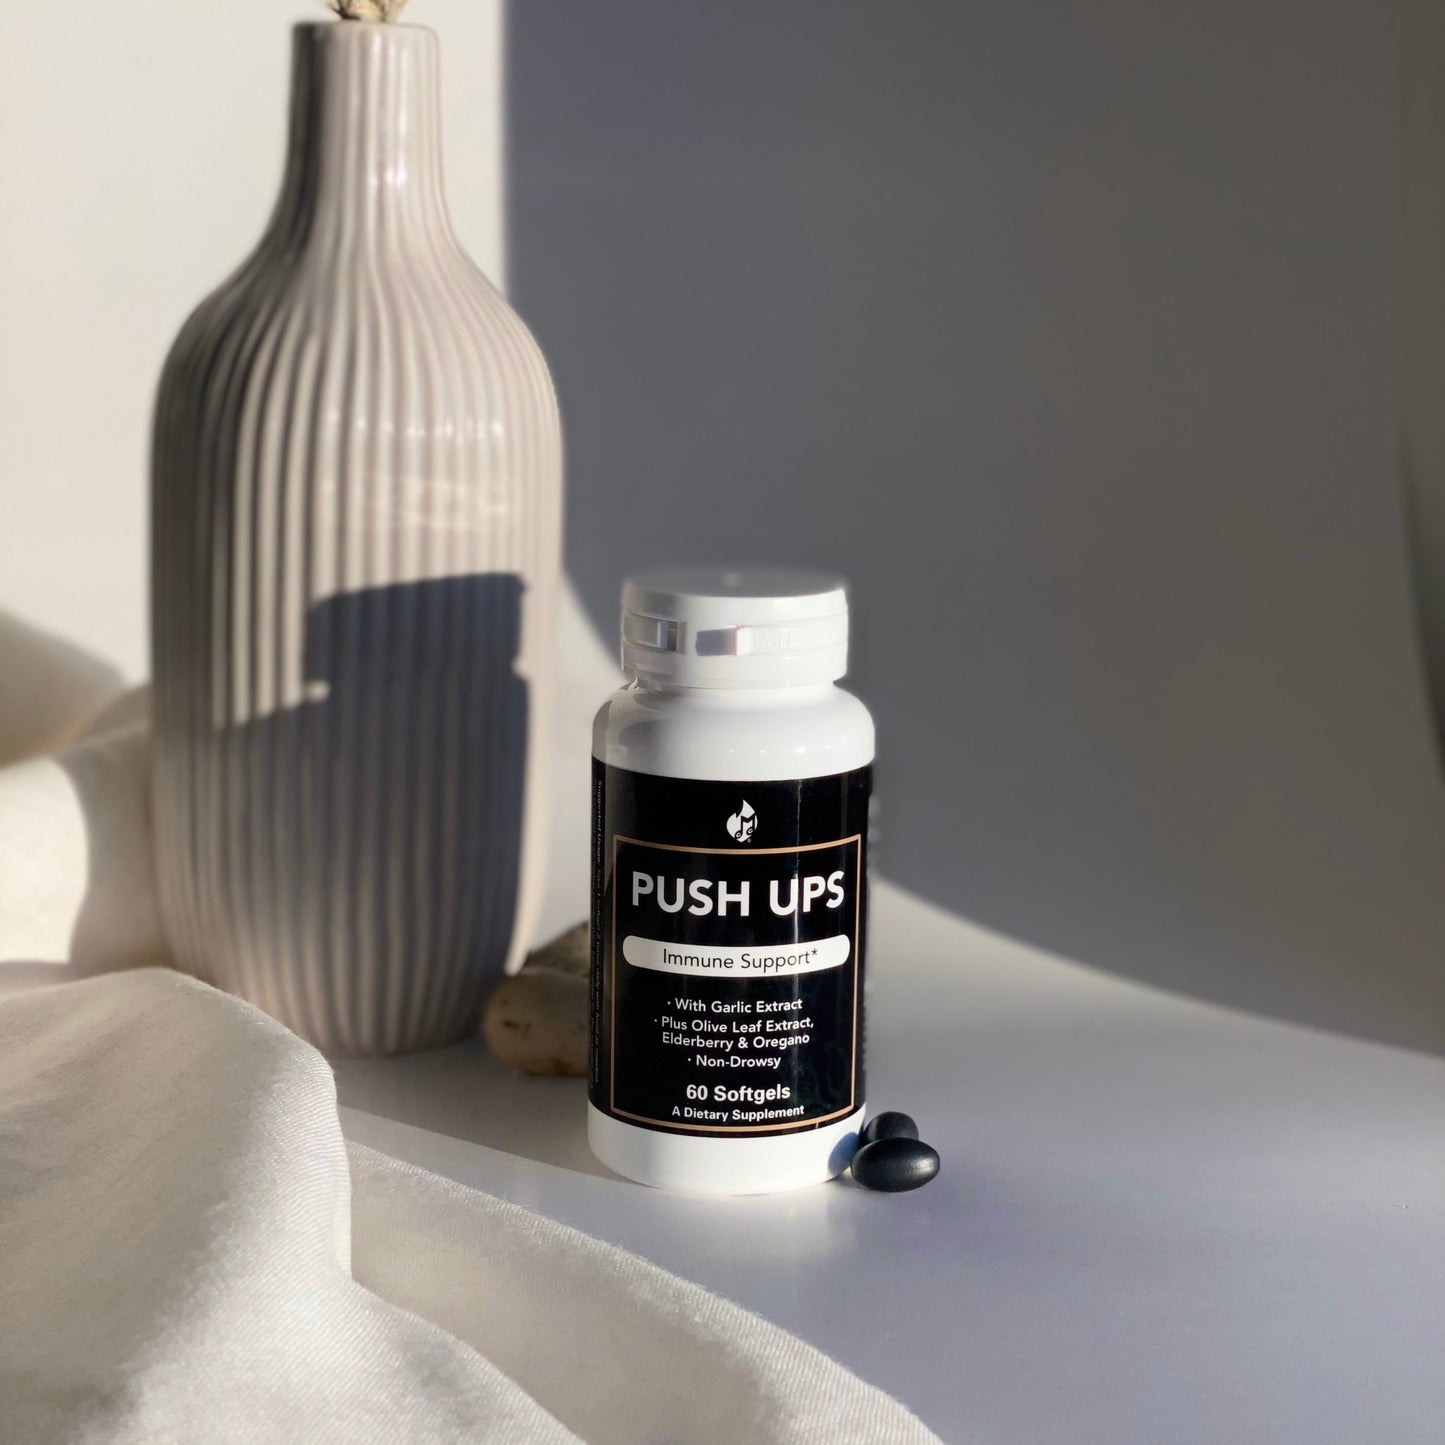 PUSH UPS immune support - House Of Wellness by MCC